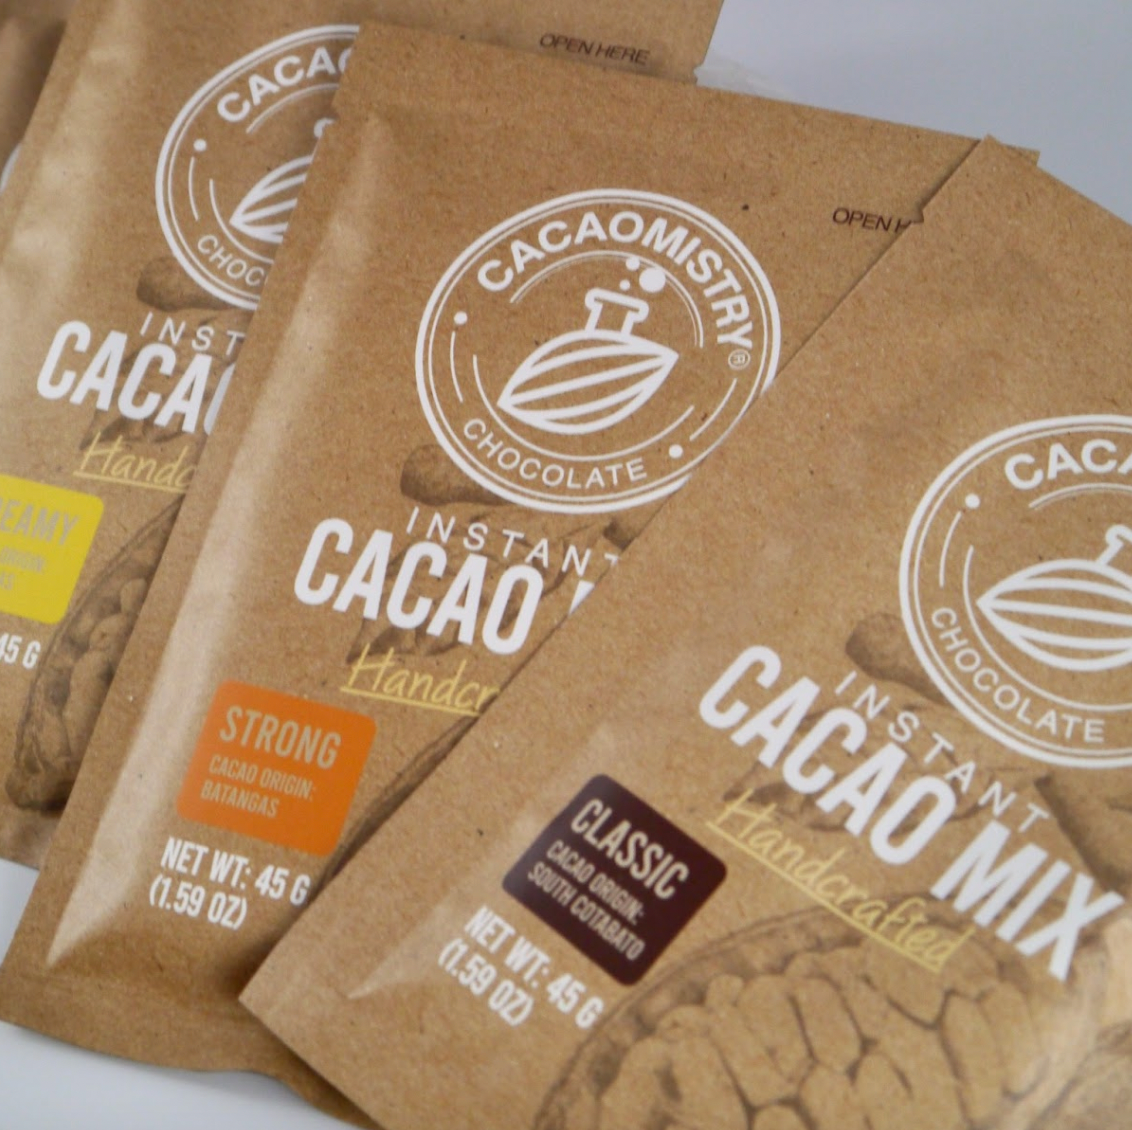 Instant Cacao Mix Gift Set